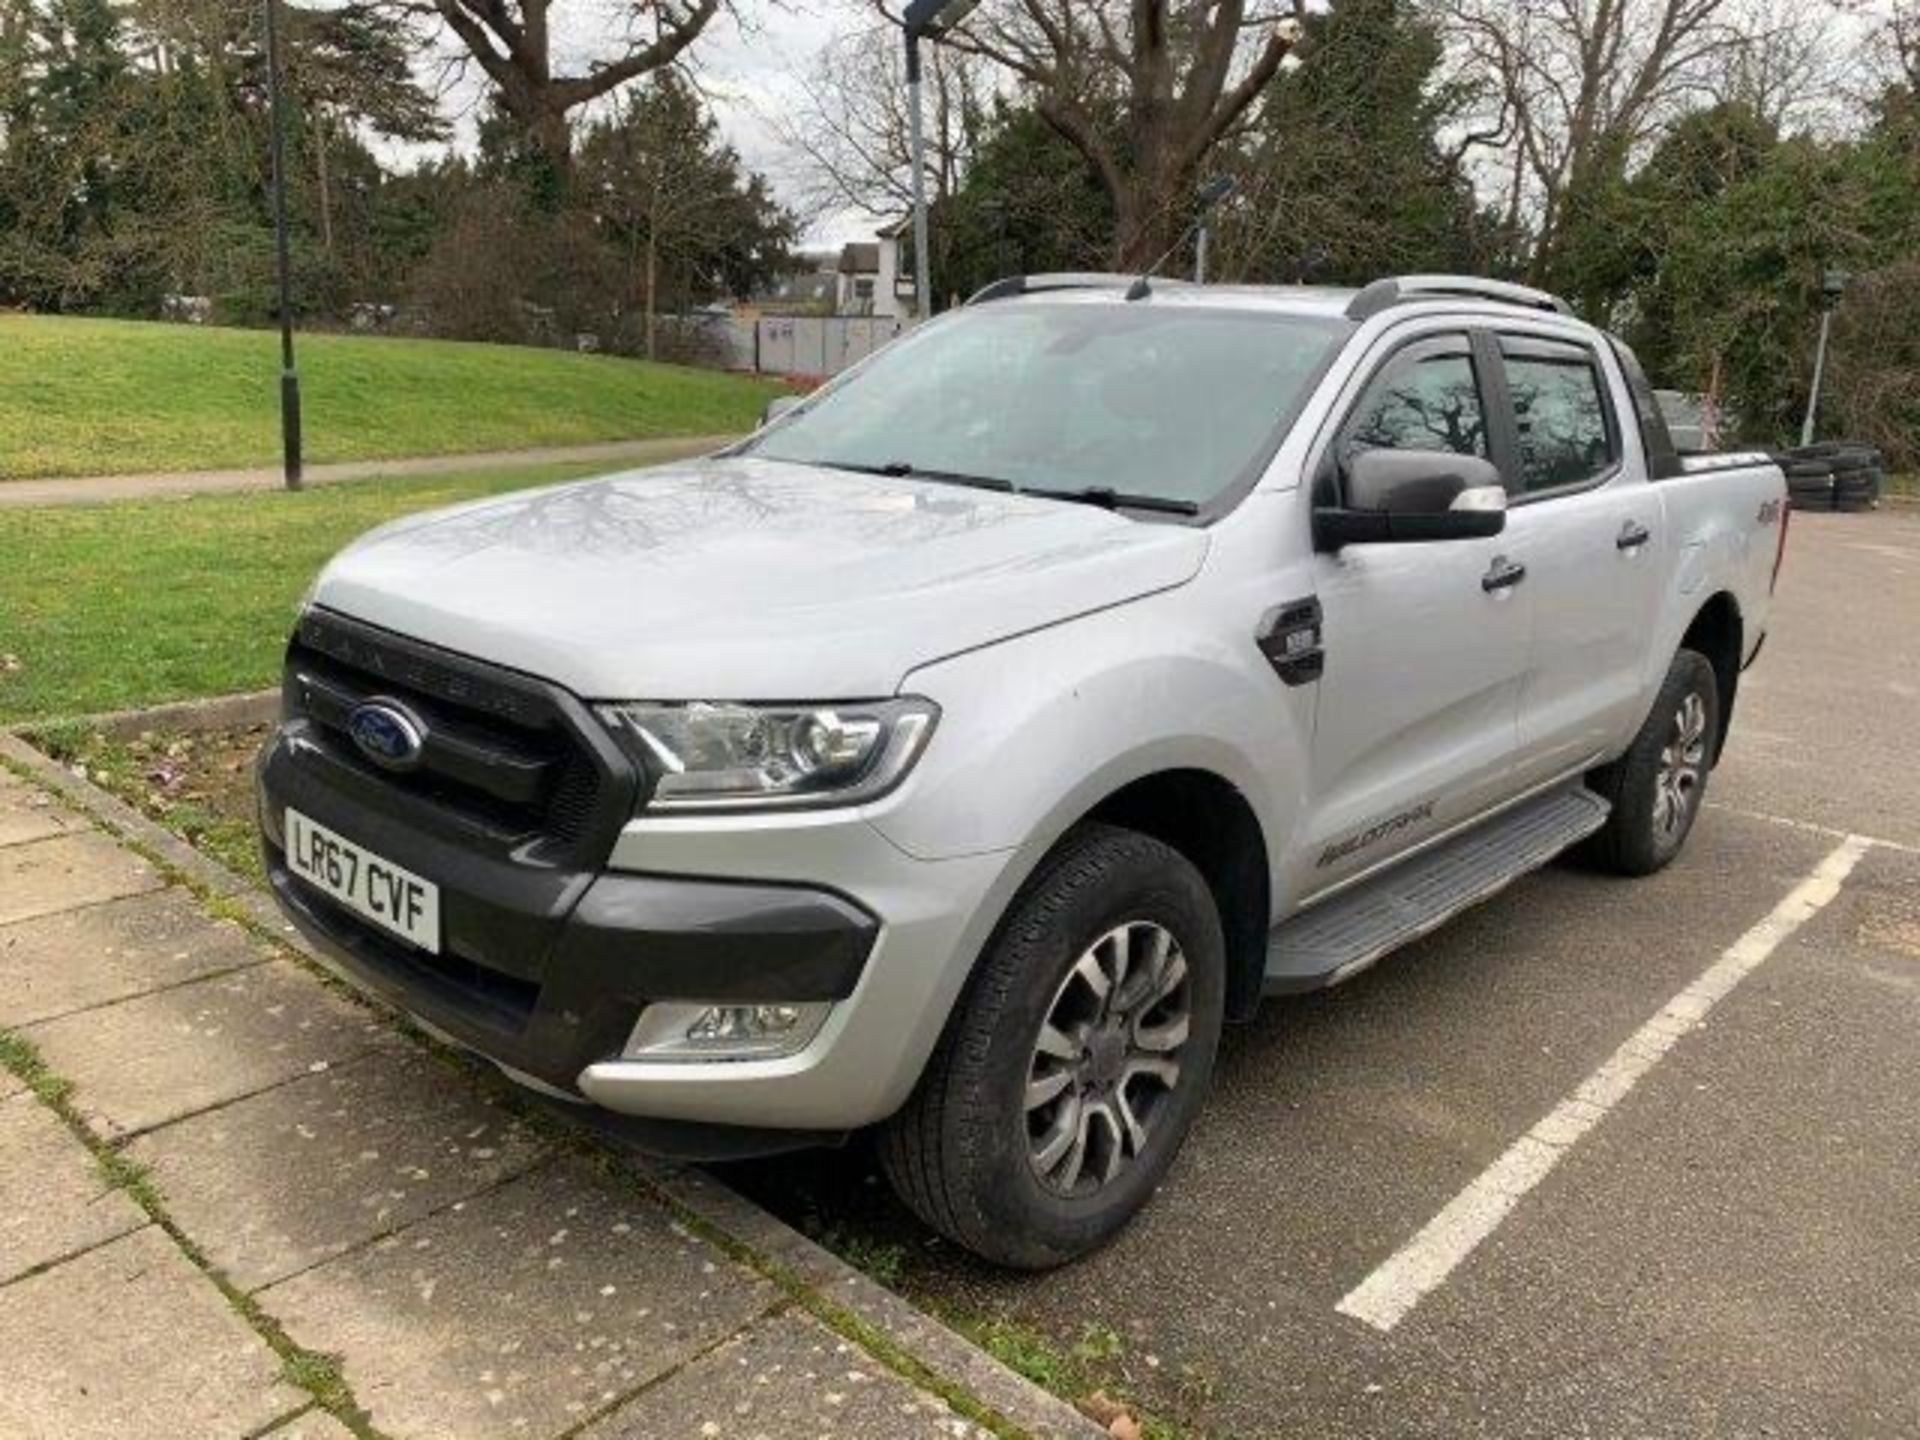 2017/67 REG FORD RANGER WILDTRAK 4X4 TDCI 3.2 DIESEL AUTO SILVER PICK-UP, SHOWING 1 FORMER KEEPER - Image 2 of 7